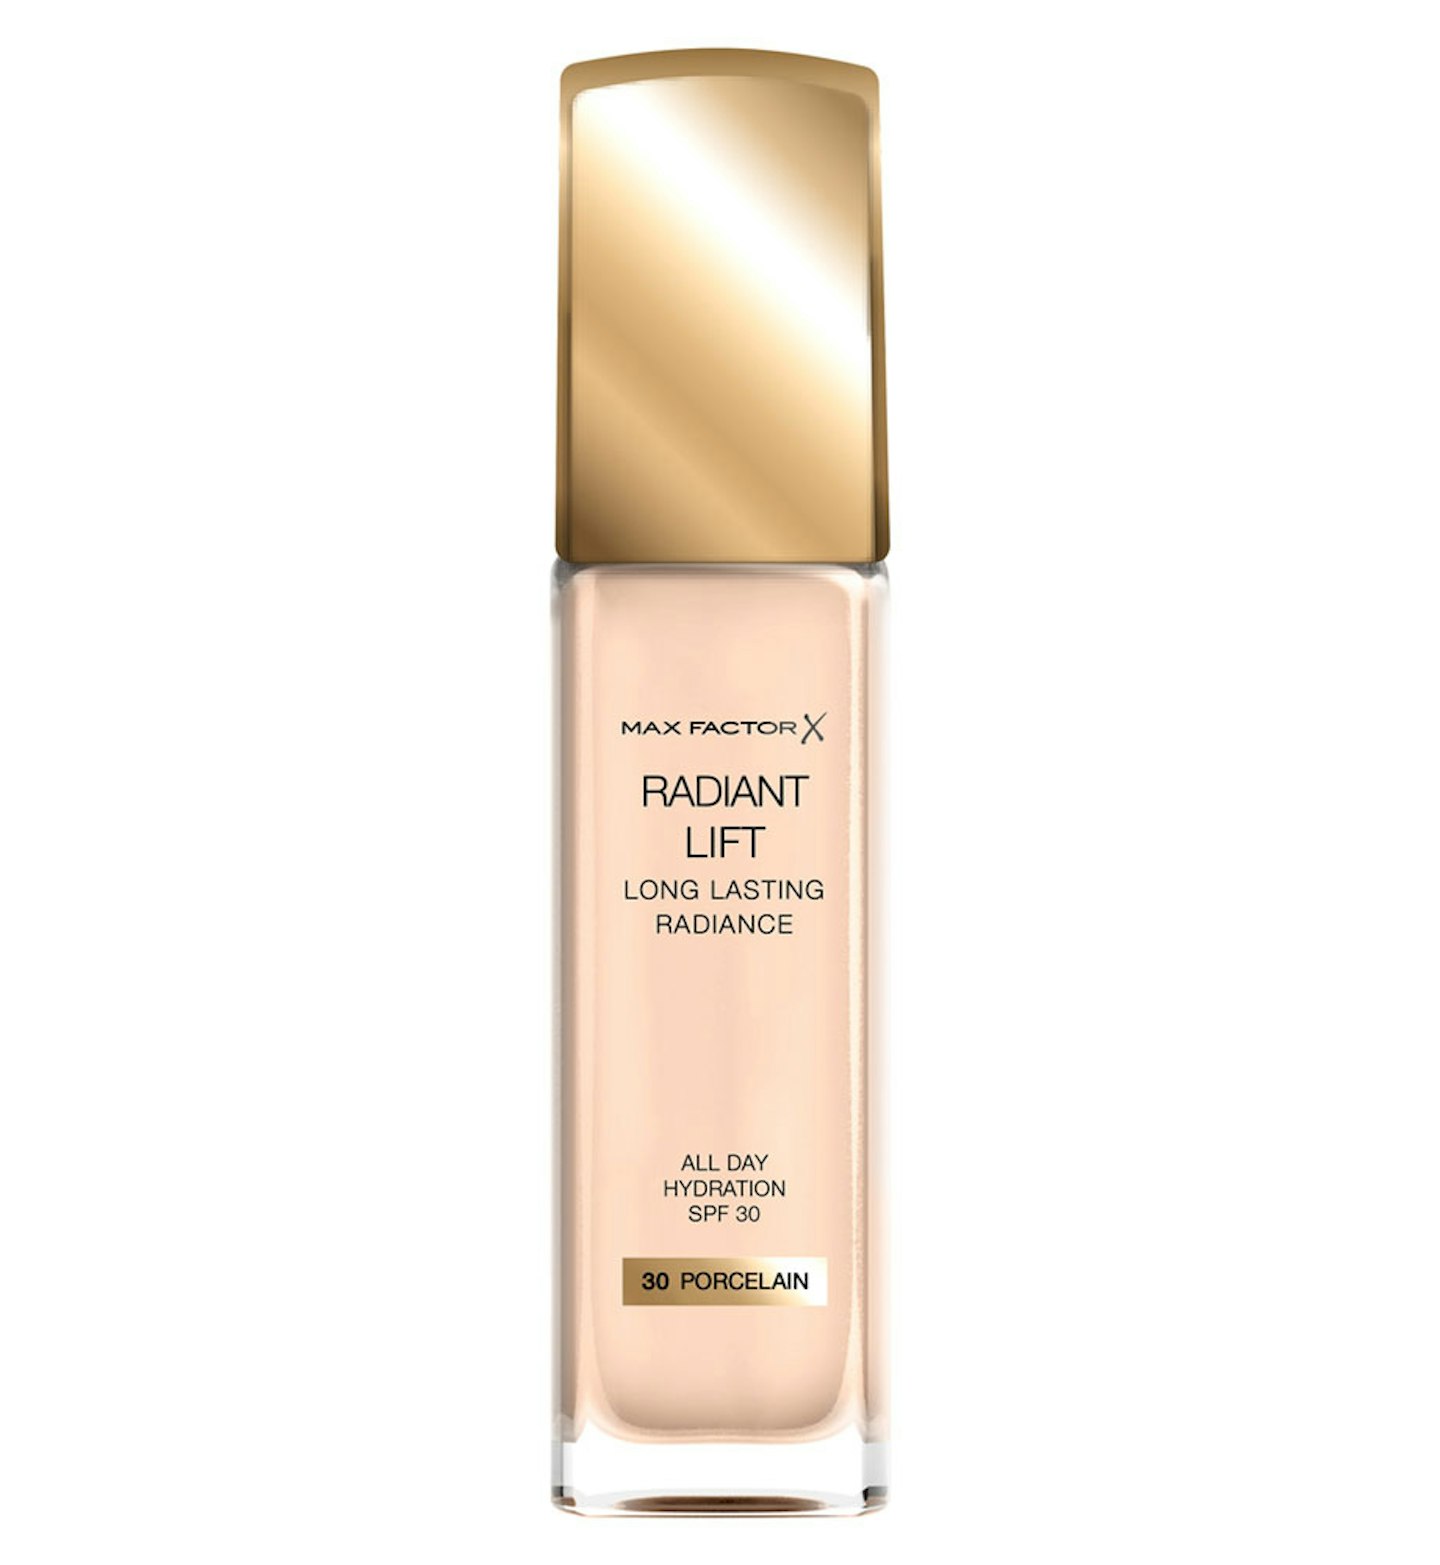 Max Factor Radiant Lift Foundation, 14.99 from Boots